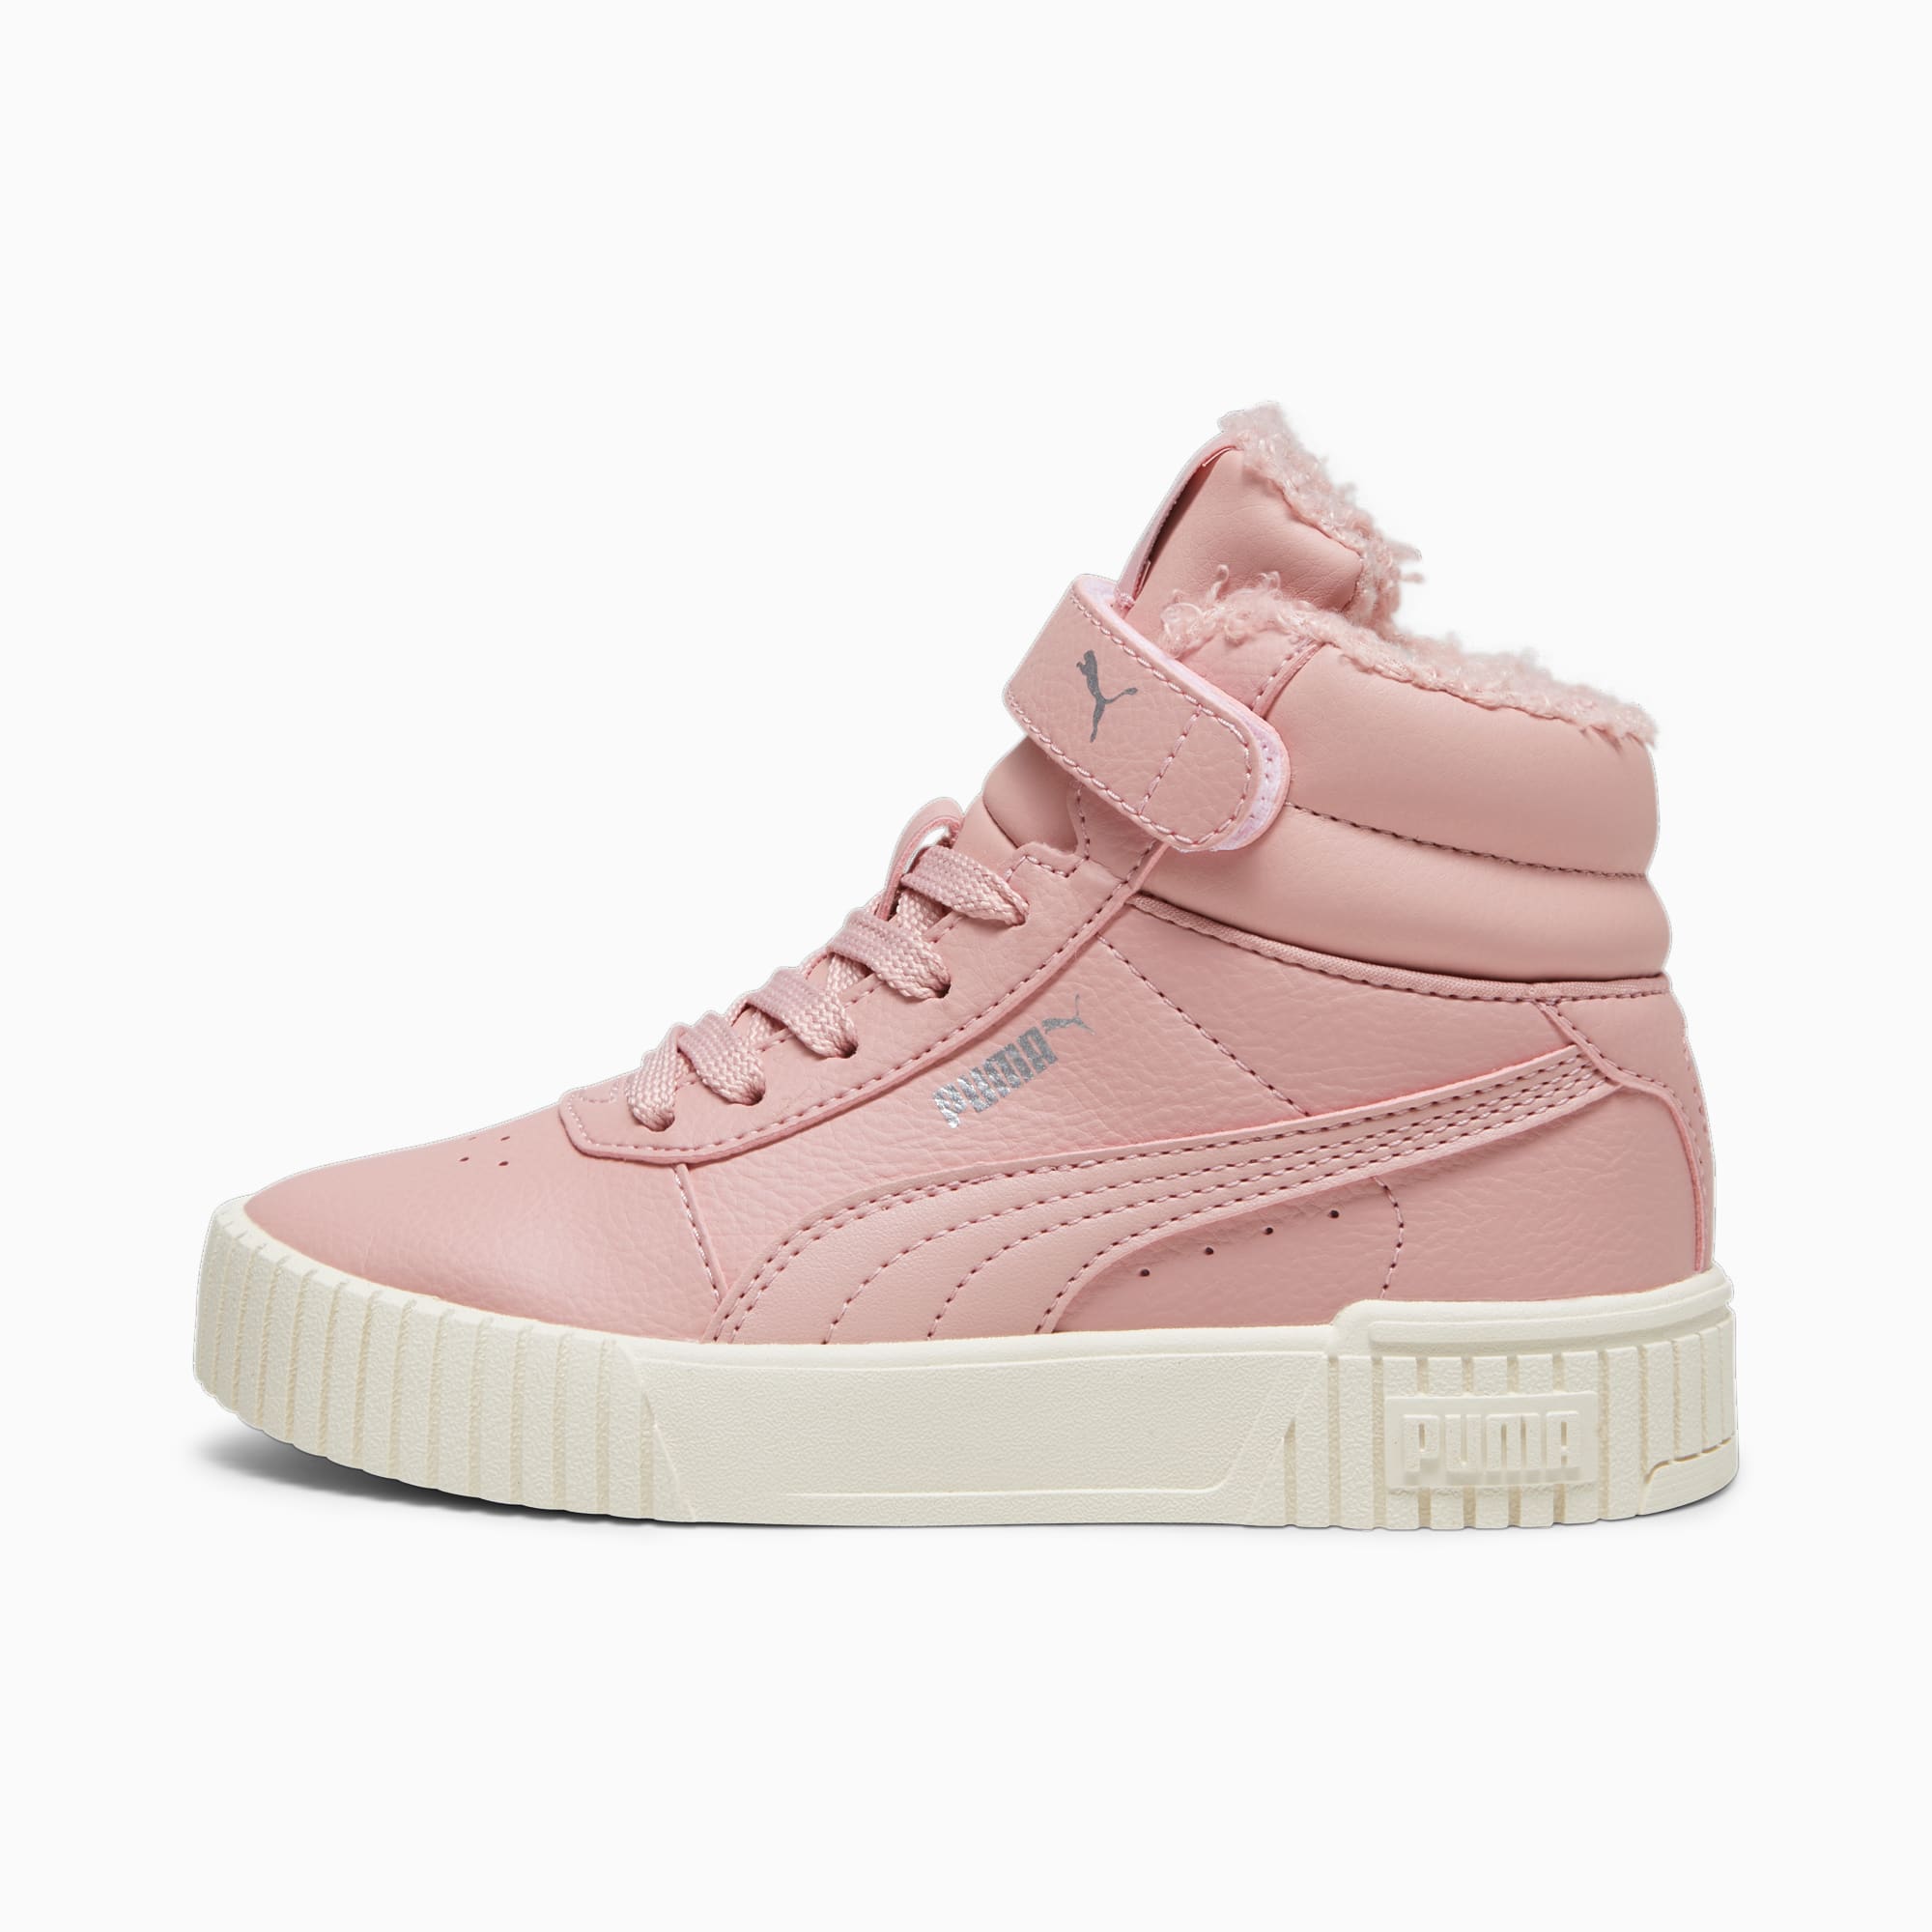 PUMA Carina 2.0 Mid Winter Sneakers Kids, Future Pink/Silver/Alpine Snow, Size 32,5, Shoes